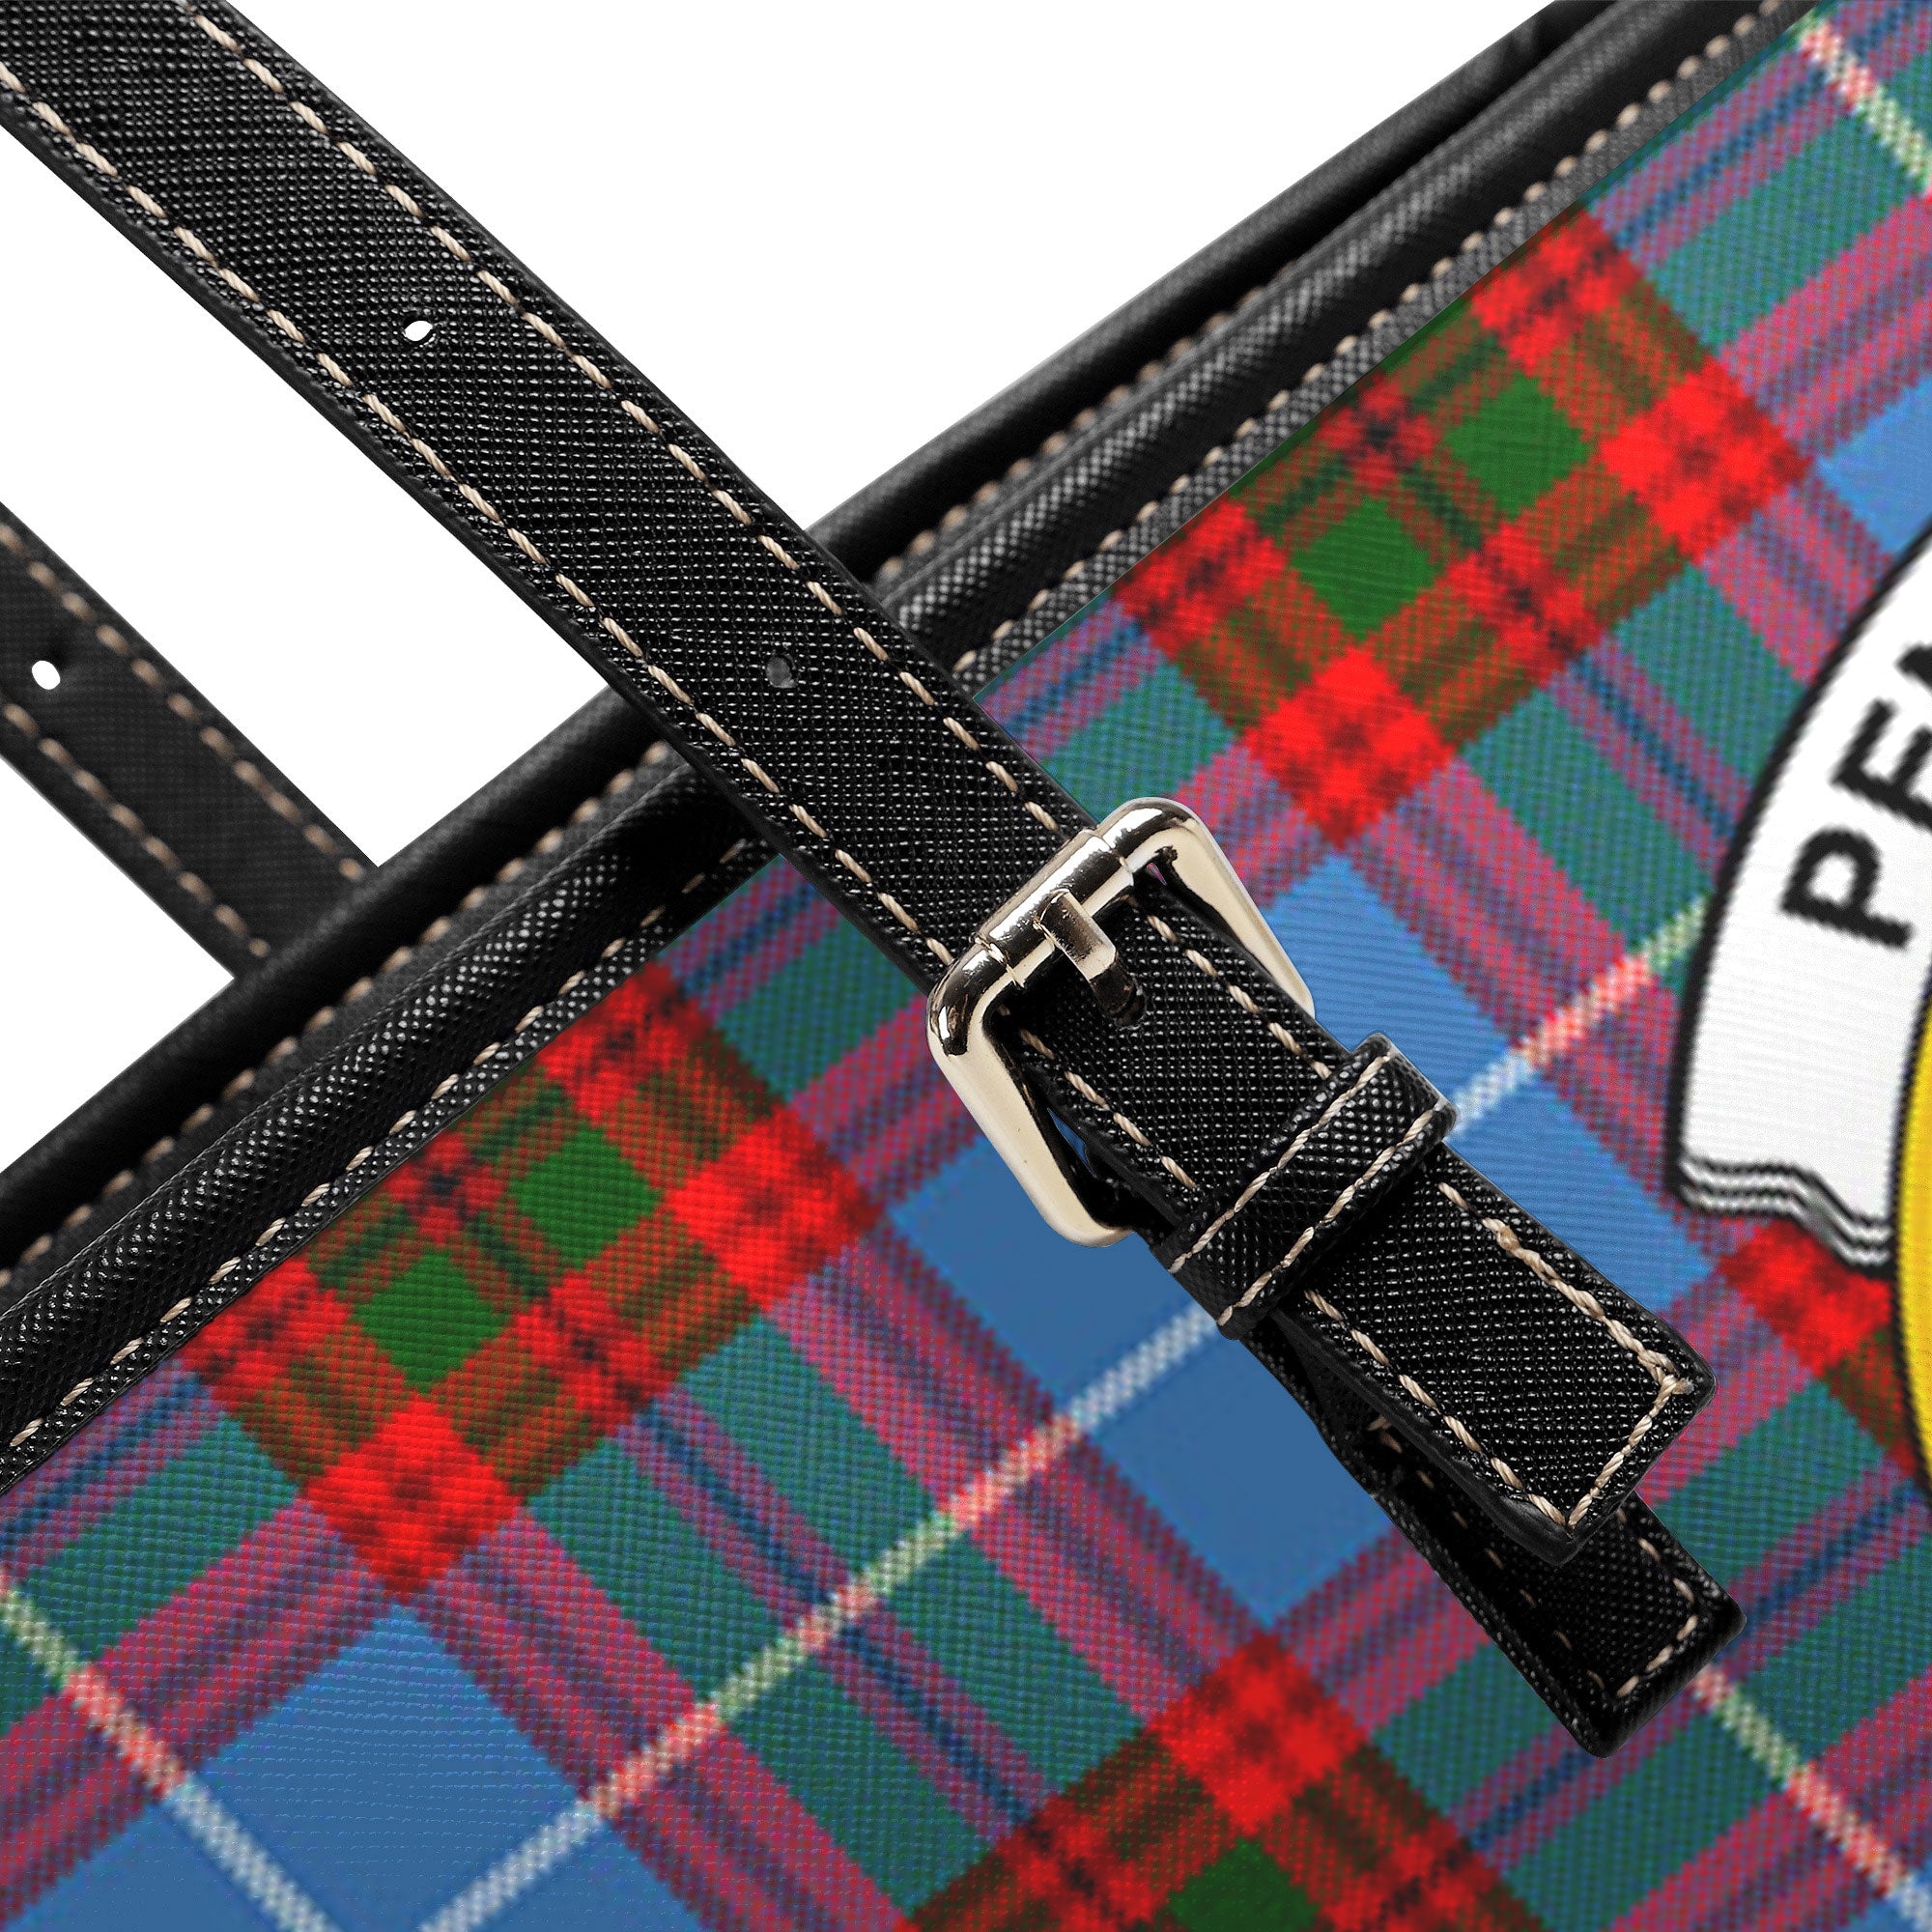 Pennycook Tartan Crest Leather Tote Bag